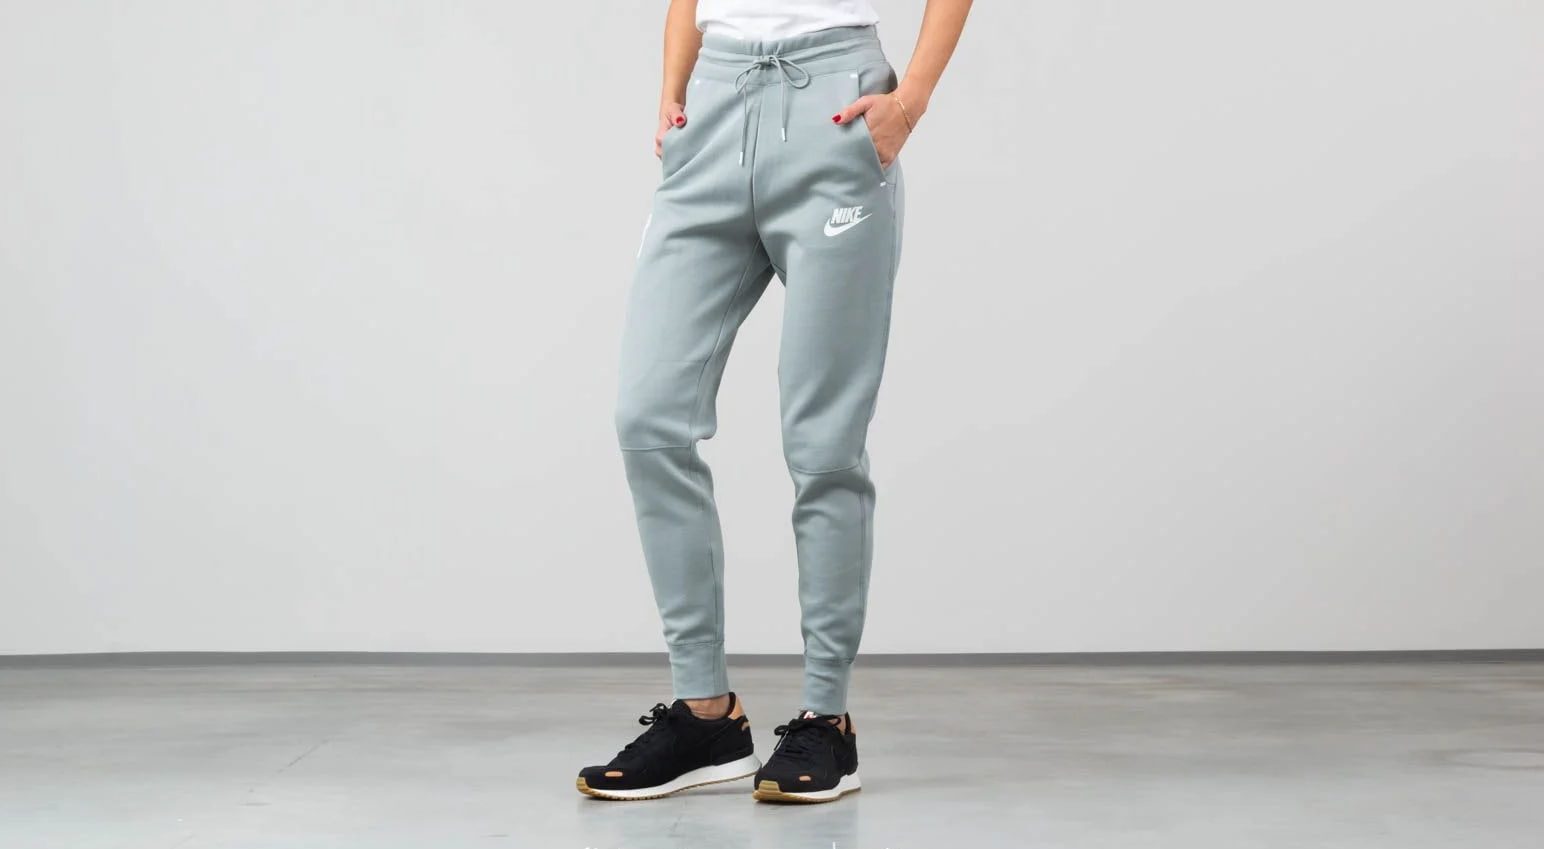 buy and current sale price of cropped nike sweatpants